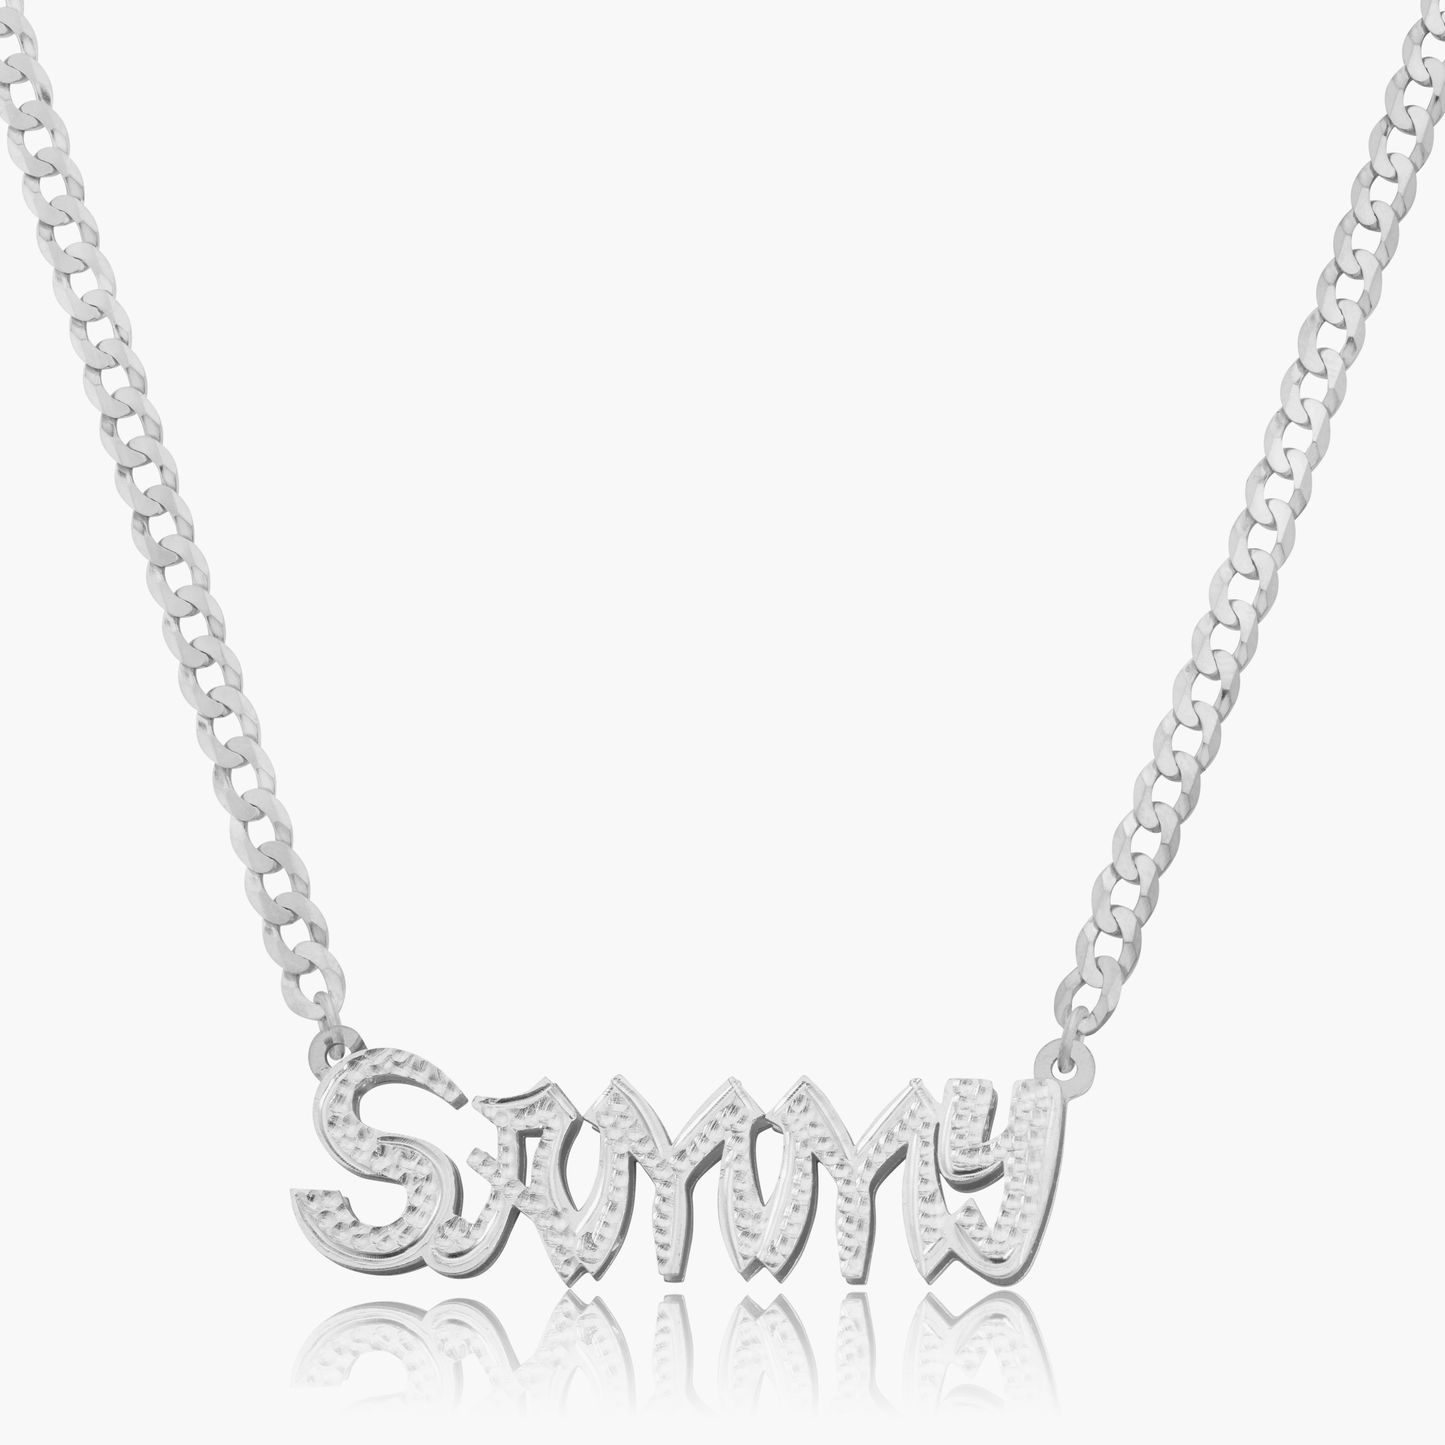 Double Plated "Take-out" Name Necklace